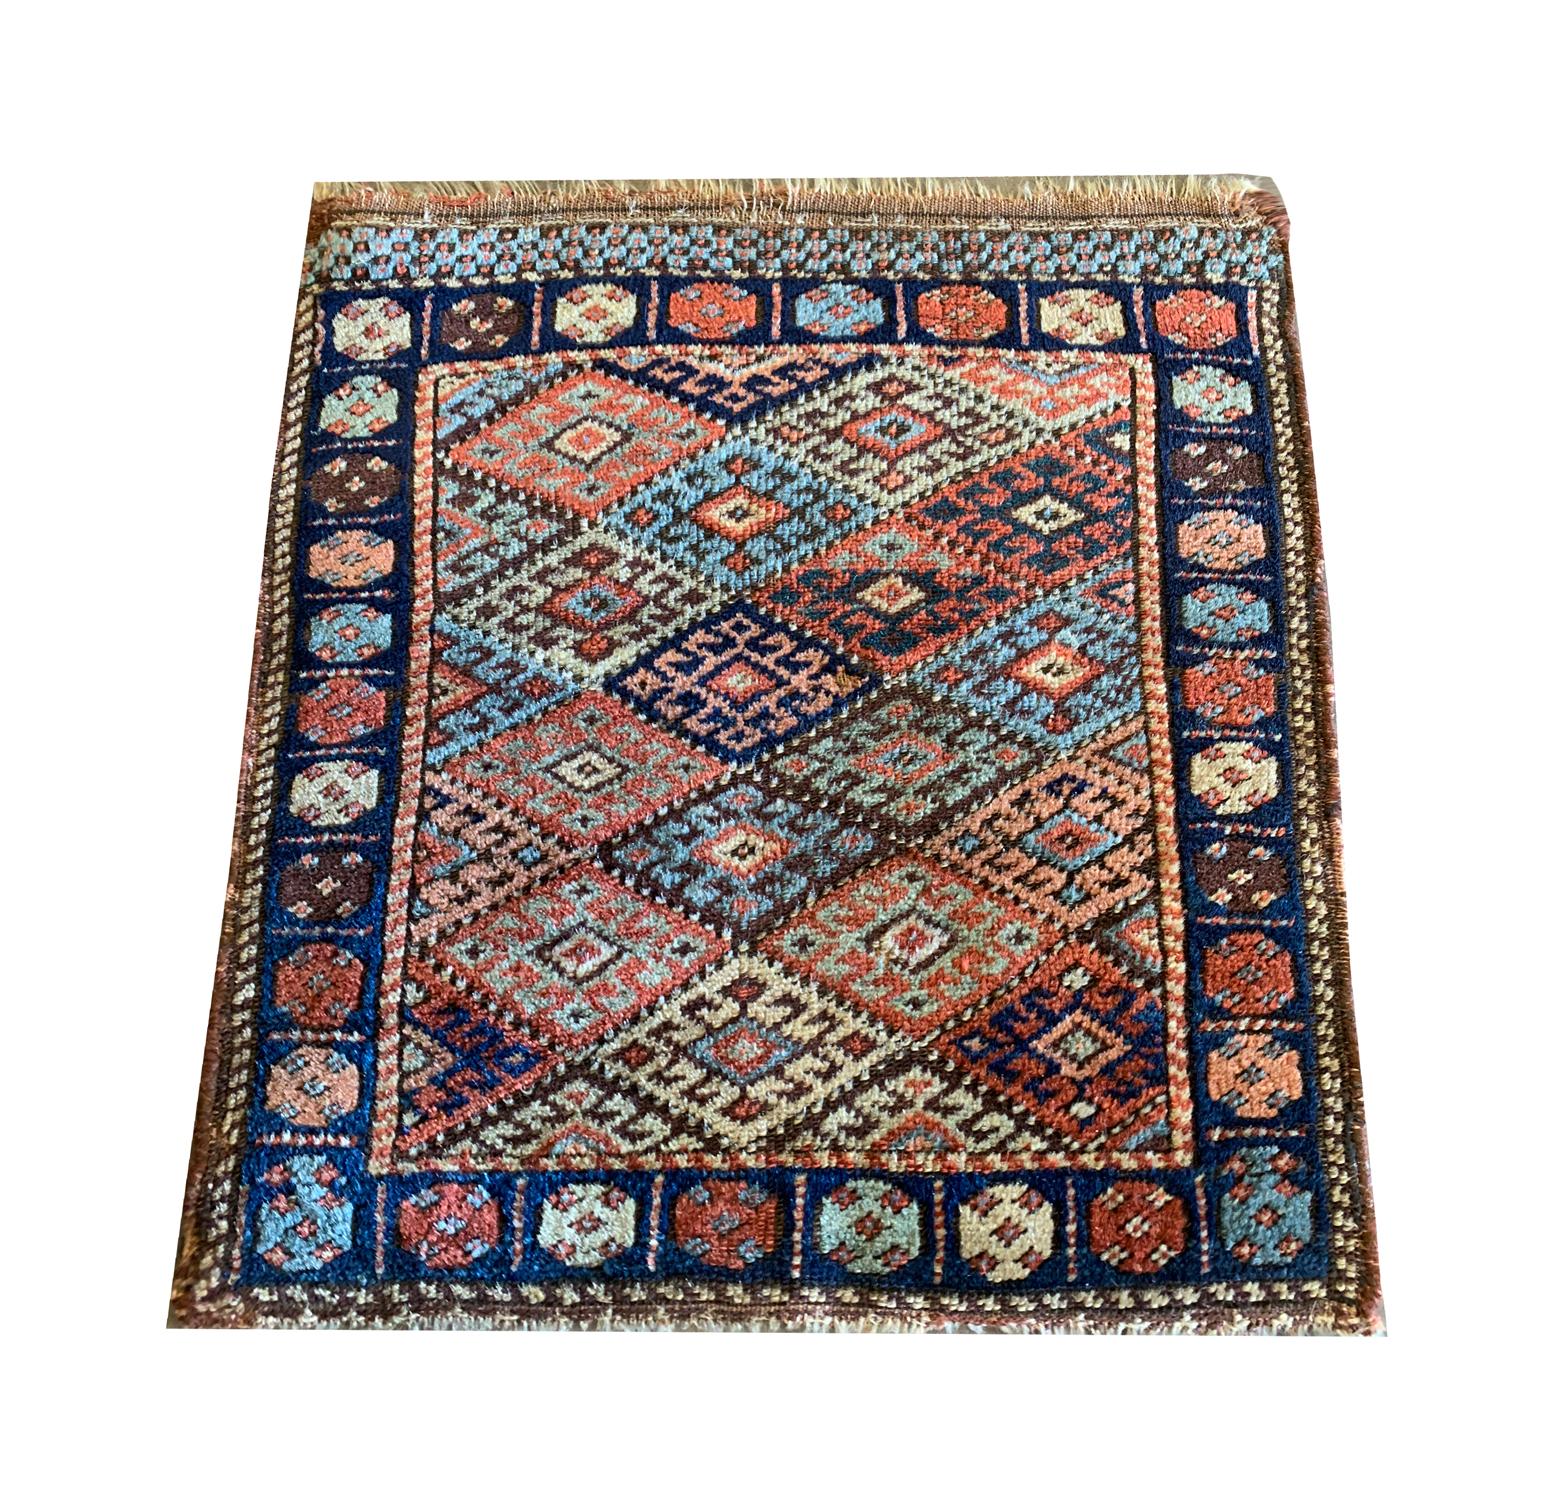 This small antique wool rug was woven by hand in Azerbaijan in the 1880s with the finest locally sourced materials. The central design features traditional hook motifs woven in a repeat geometric diamond pattern, in accents of orange, blue, green,